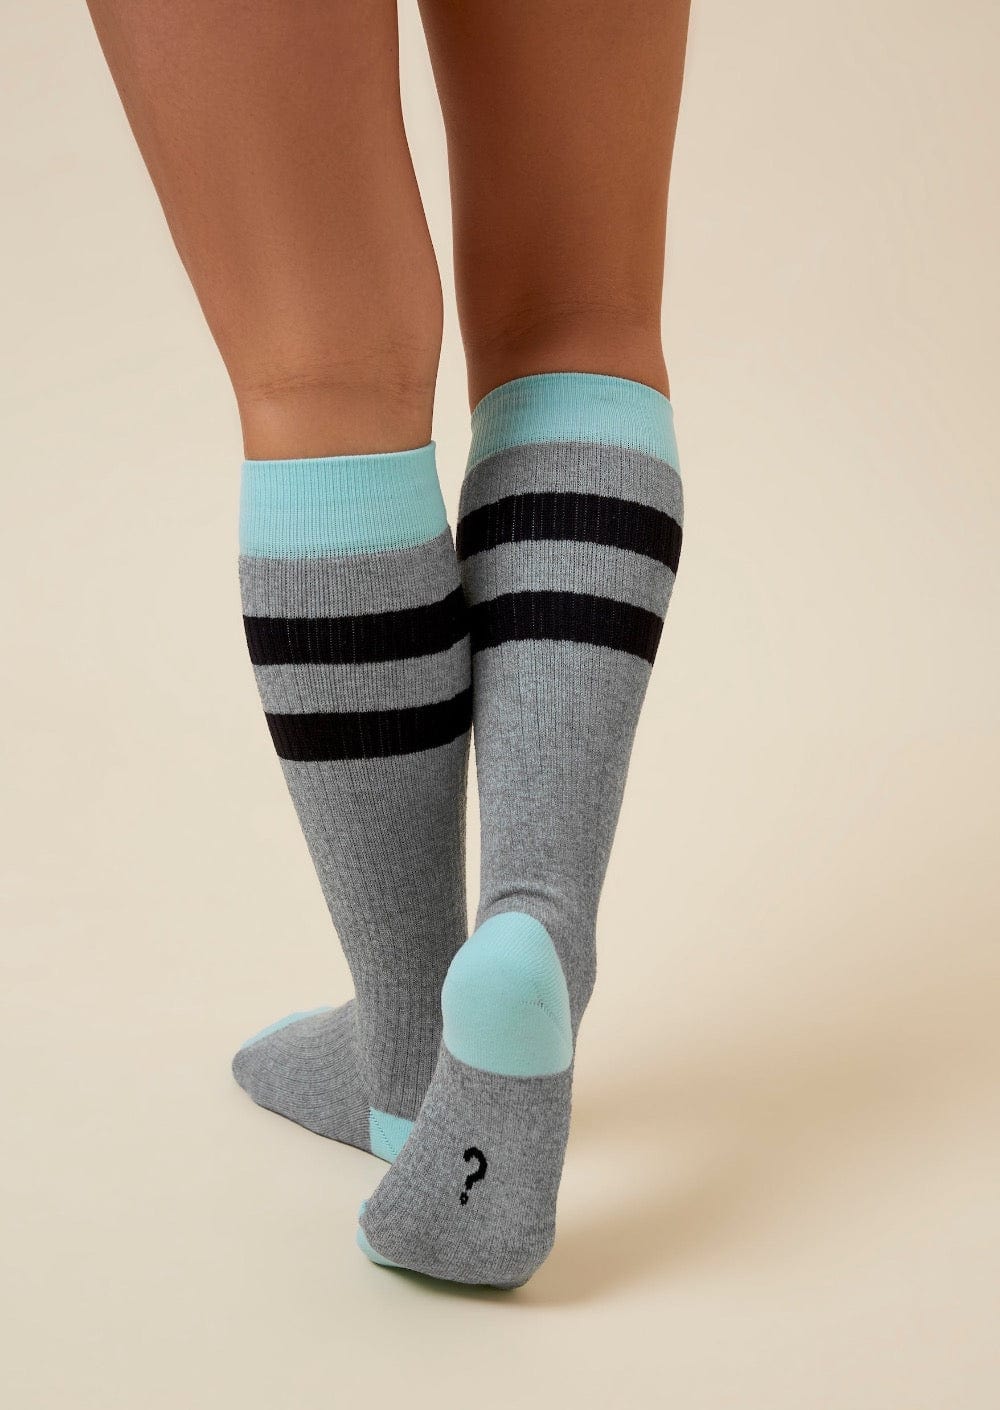 Thery Group Socks Grey Marle/Mint The Comforter Maternity Compression Sock back view